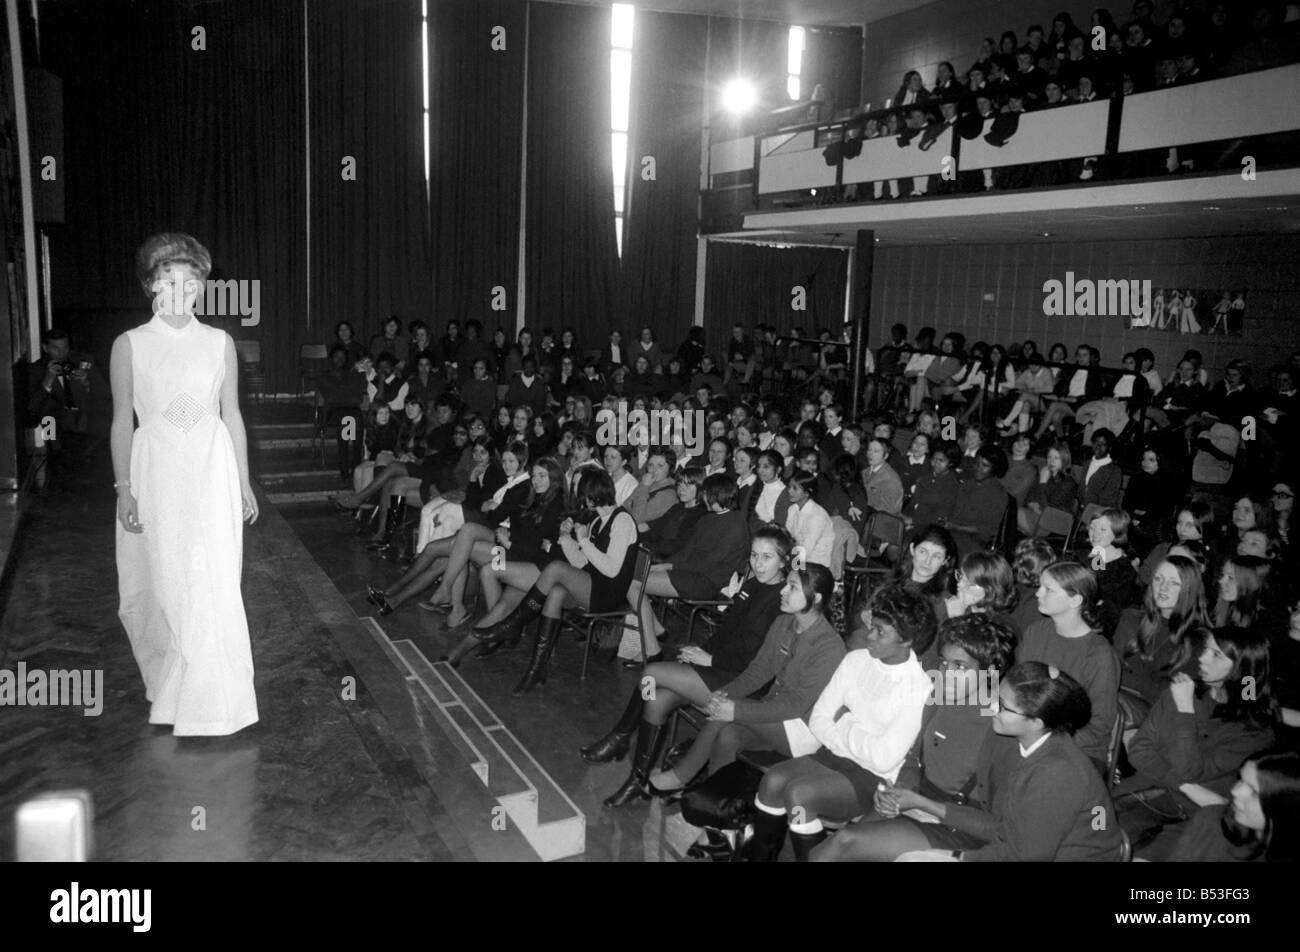 Fashion Clothing. Today, girls in Tower Hamlets schools saw their own fashion show at Tower Hamlets school in Richard Street, E. 1. The show was presented by a well-known fashion house, Carnegie Models, Ltd., and arranged by the local ILEA careers office as part of an extensive programme of talks. The fashion show in progress. December 1969 Z11835-003 Stock Photo